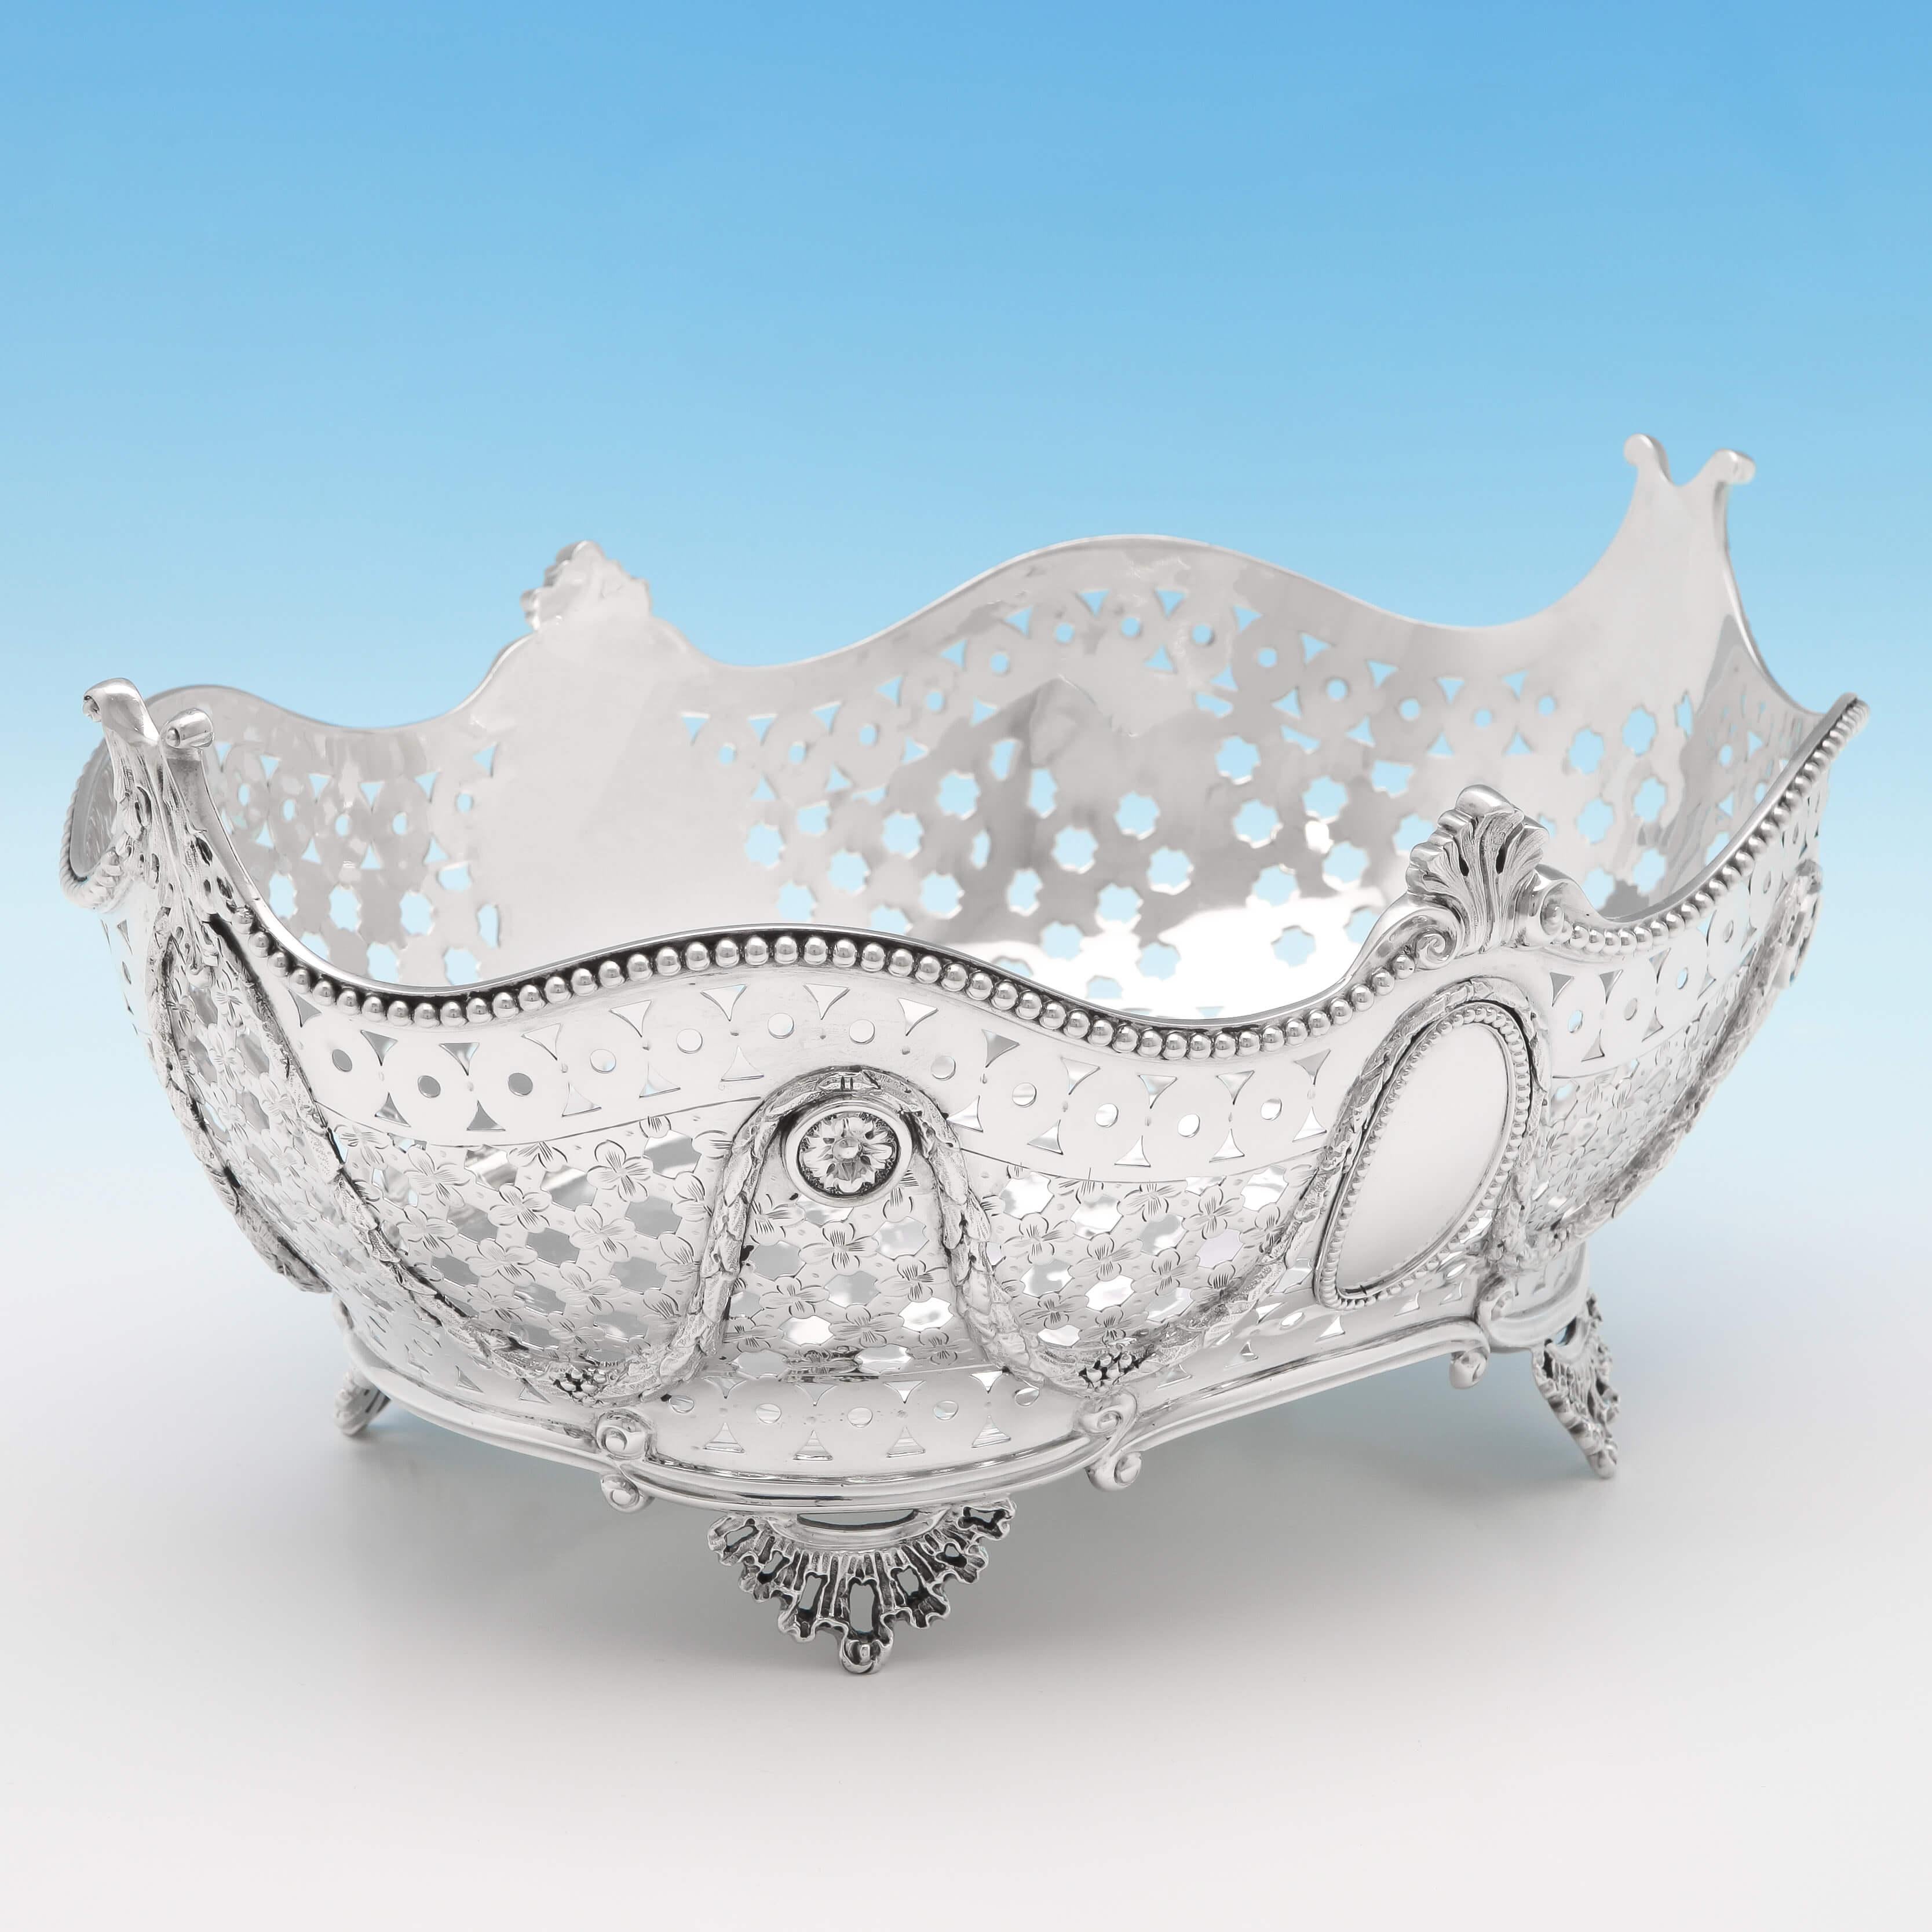 Hallmarked in London in 1886 by Job Frank Hall, this attractive, Victorian, antique sterling silver bread dish, features pierced decoration to the sides, a bead border, swags and garland detailing, and four cast and applied feet. The basket measures